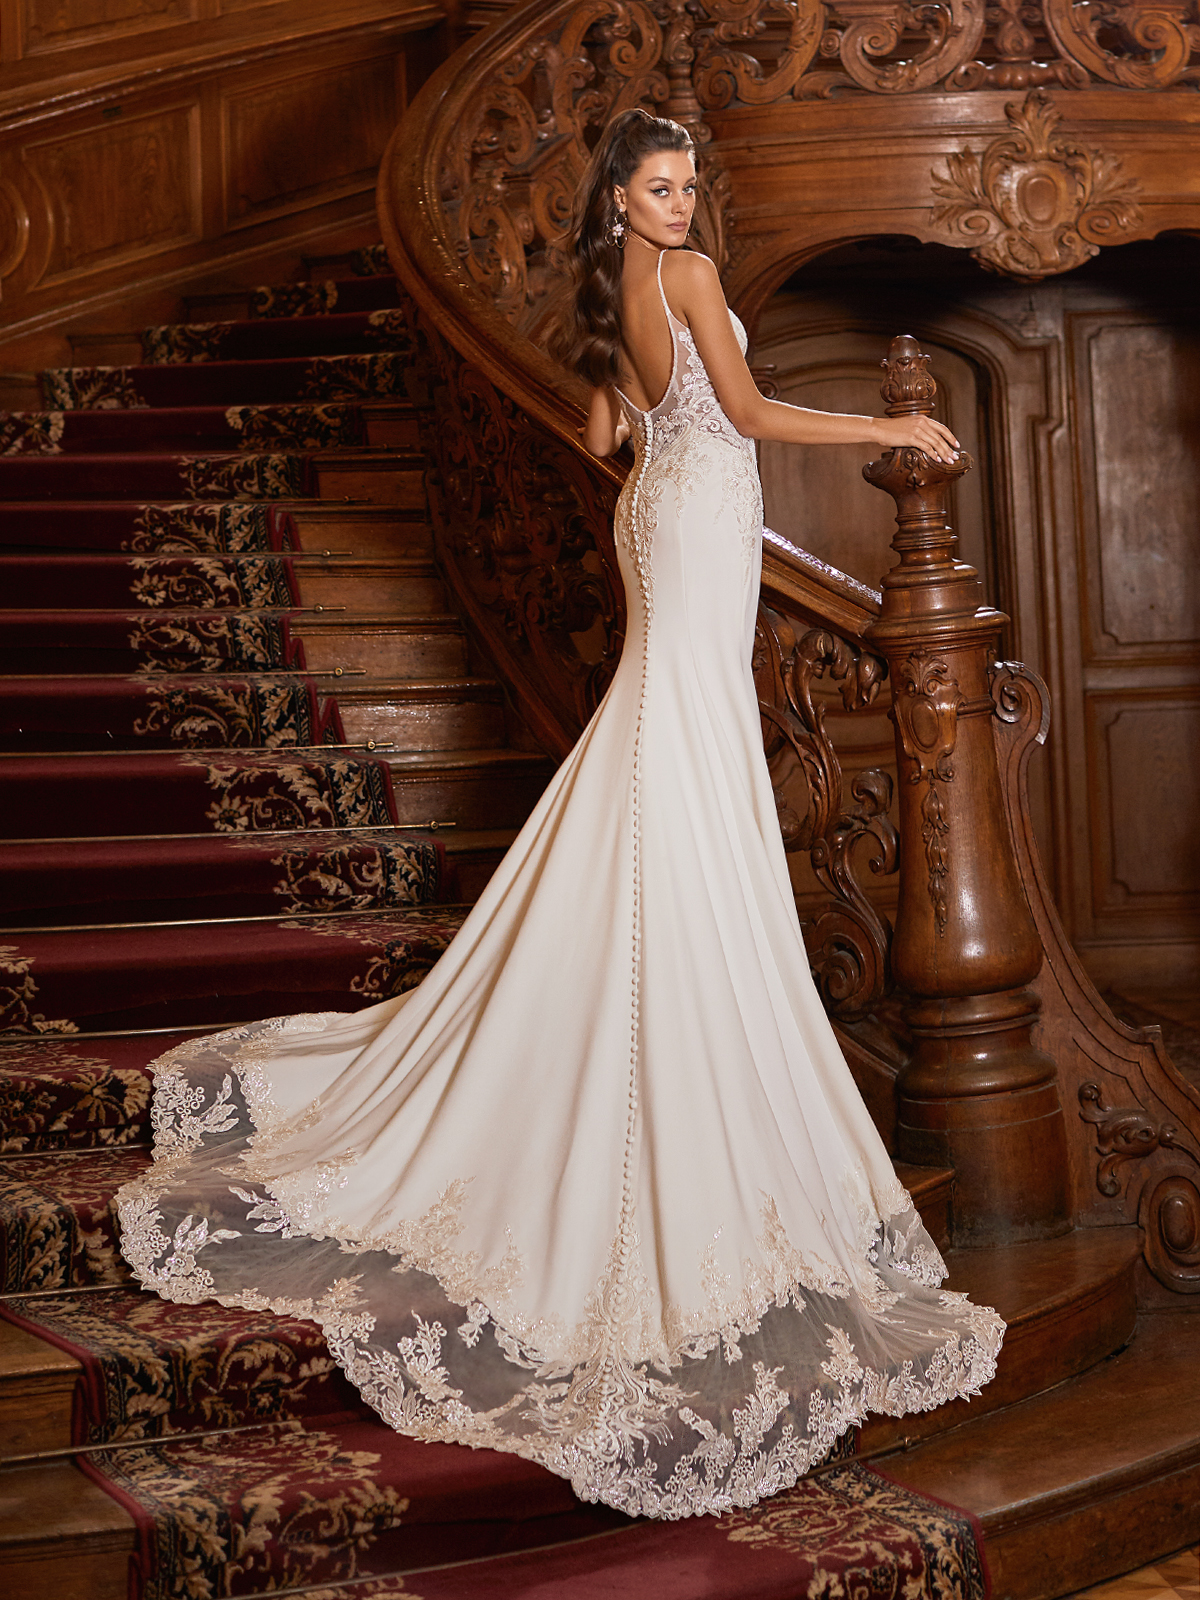 Wedding Dress Styles – What Is The Best Dress For Your Body Shape